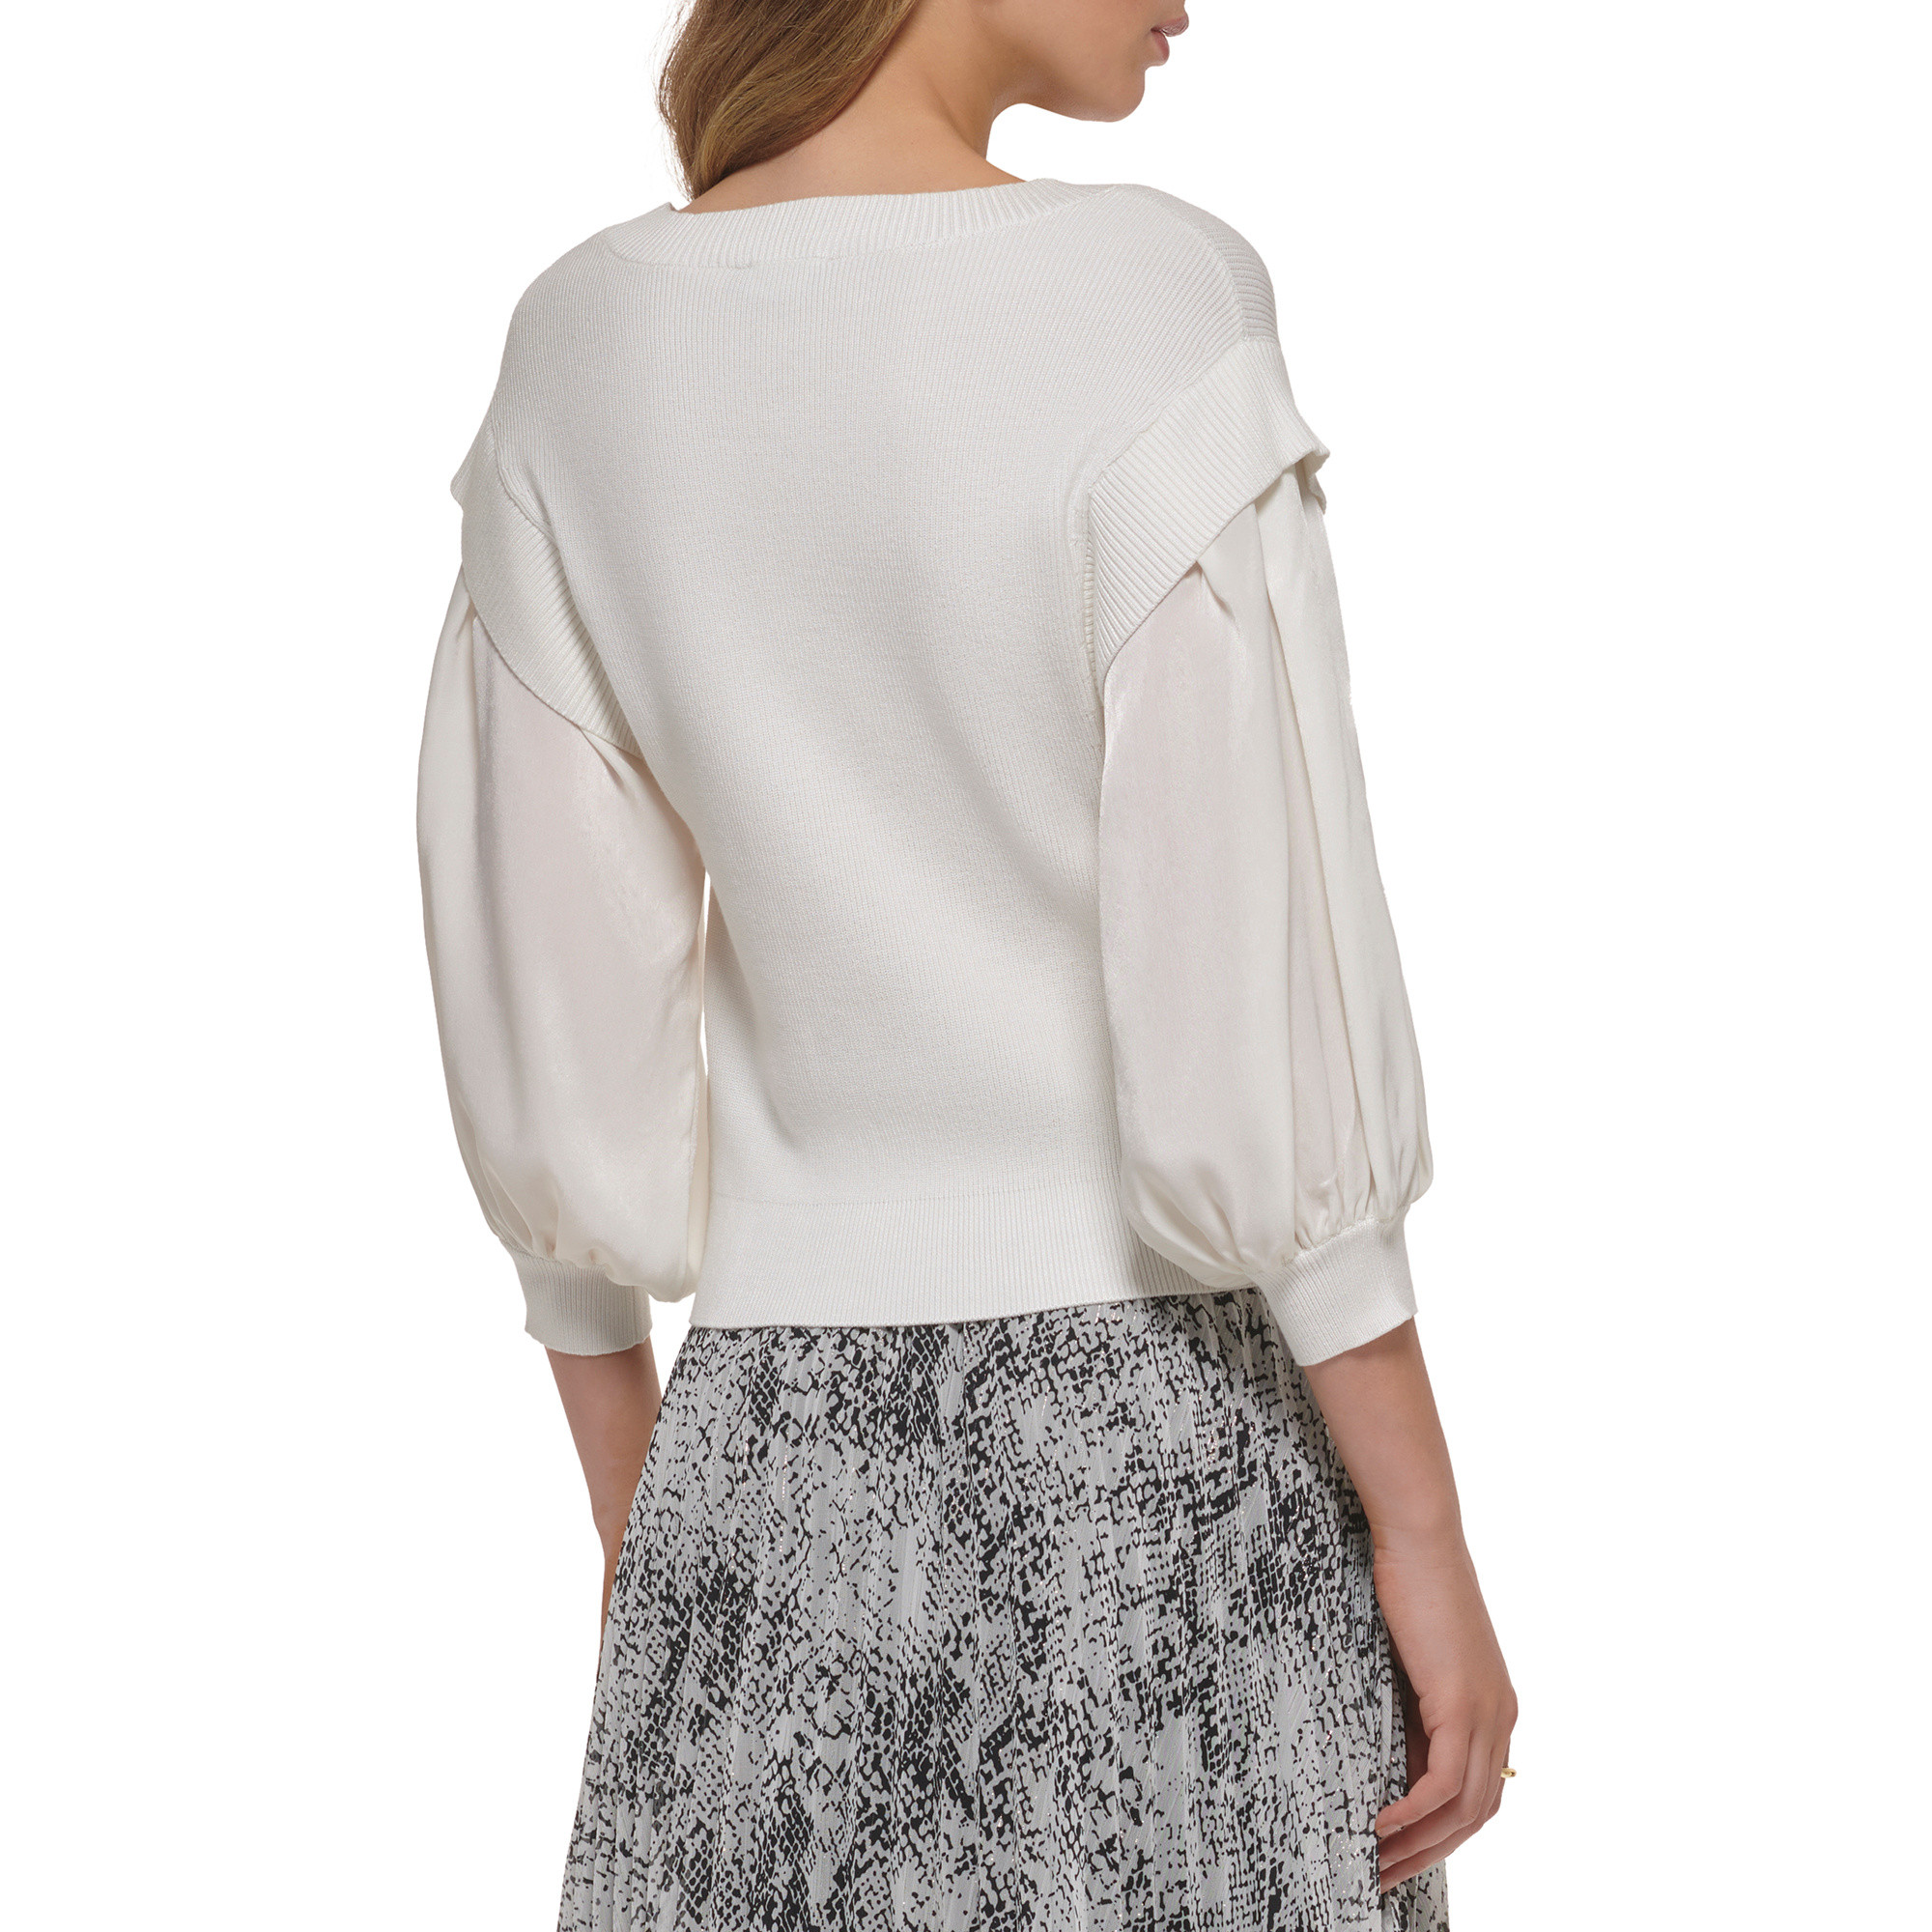 DKNY - Ribbed top with contrasting chiffon sleeve, White Ivory, large image number 3